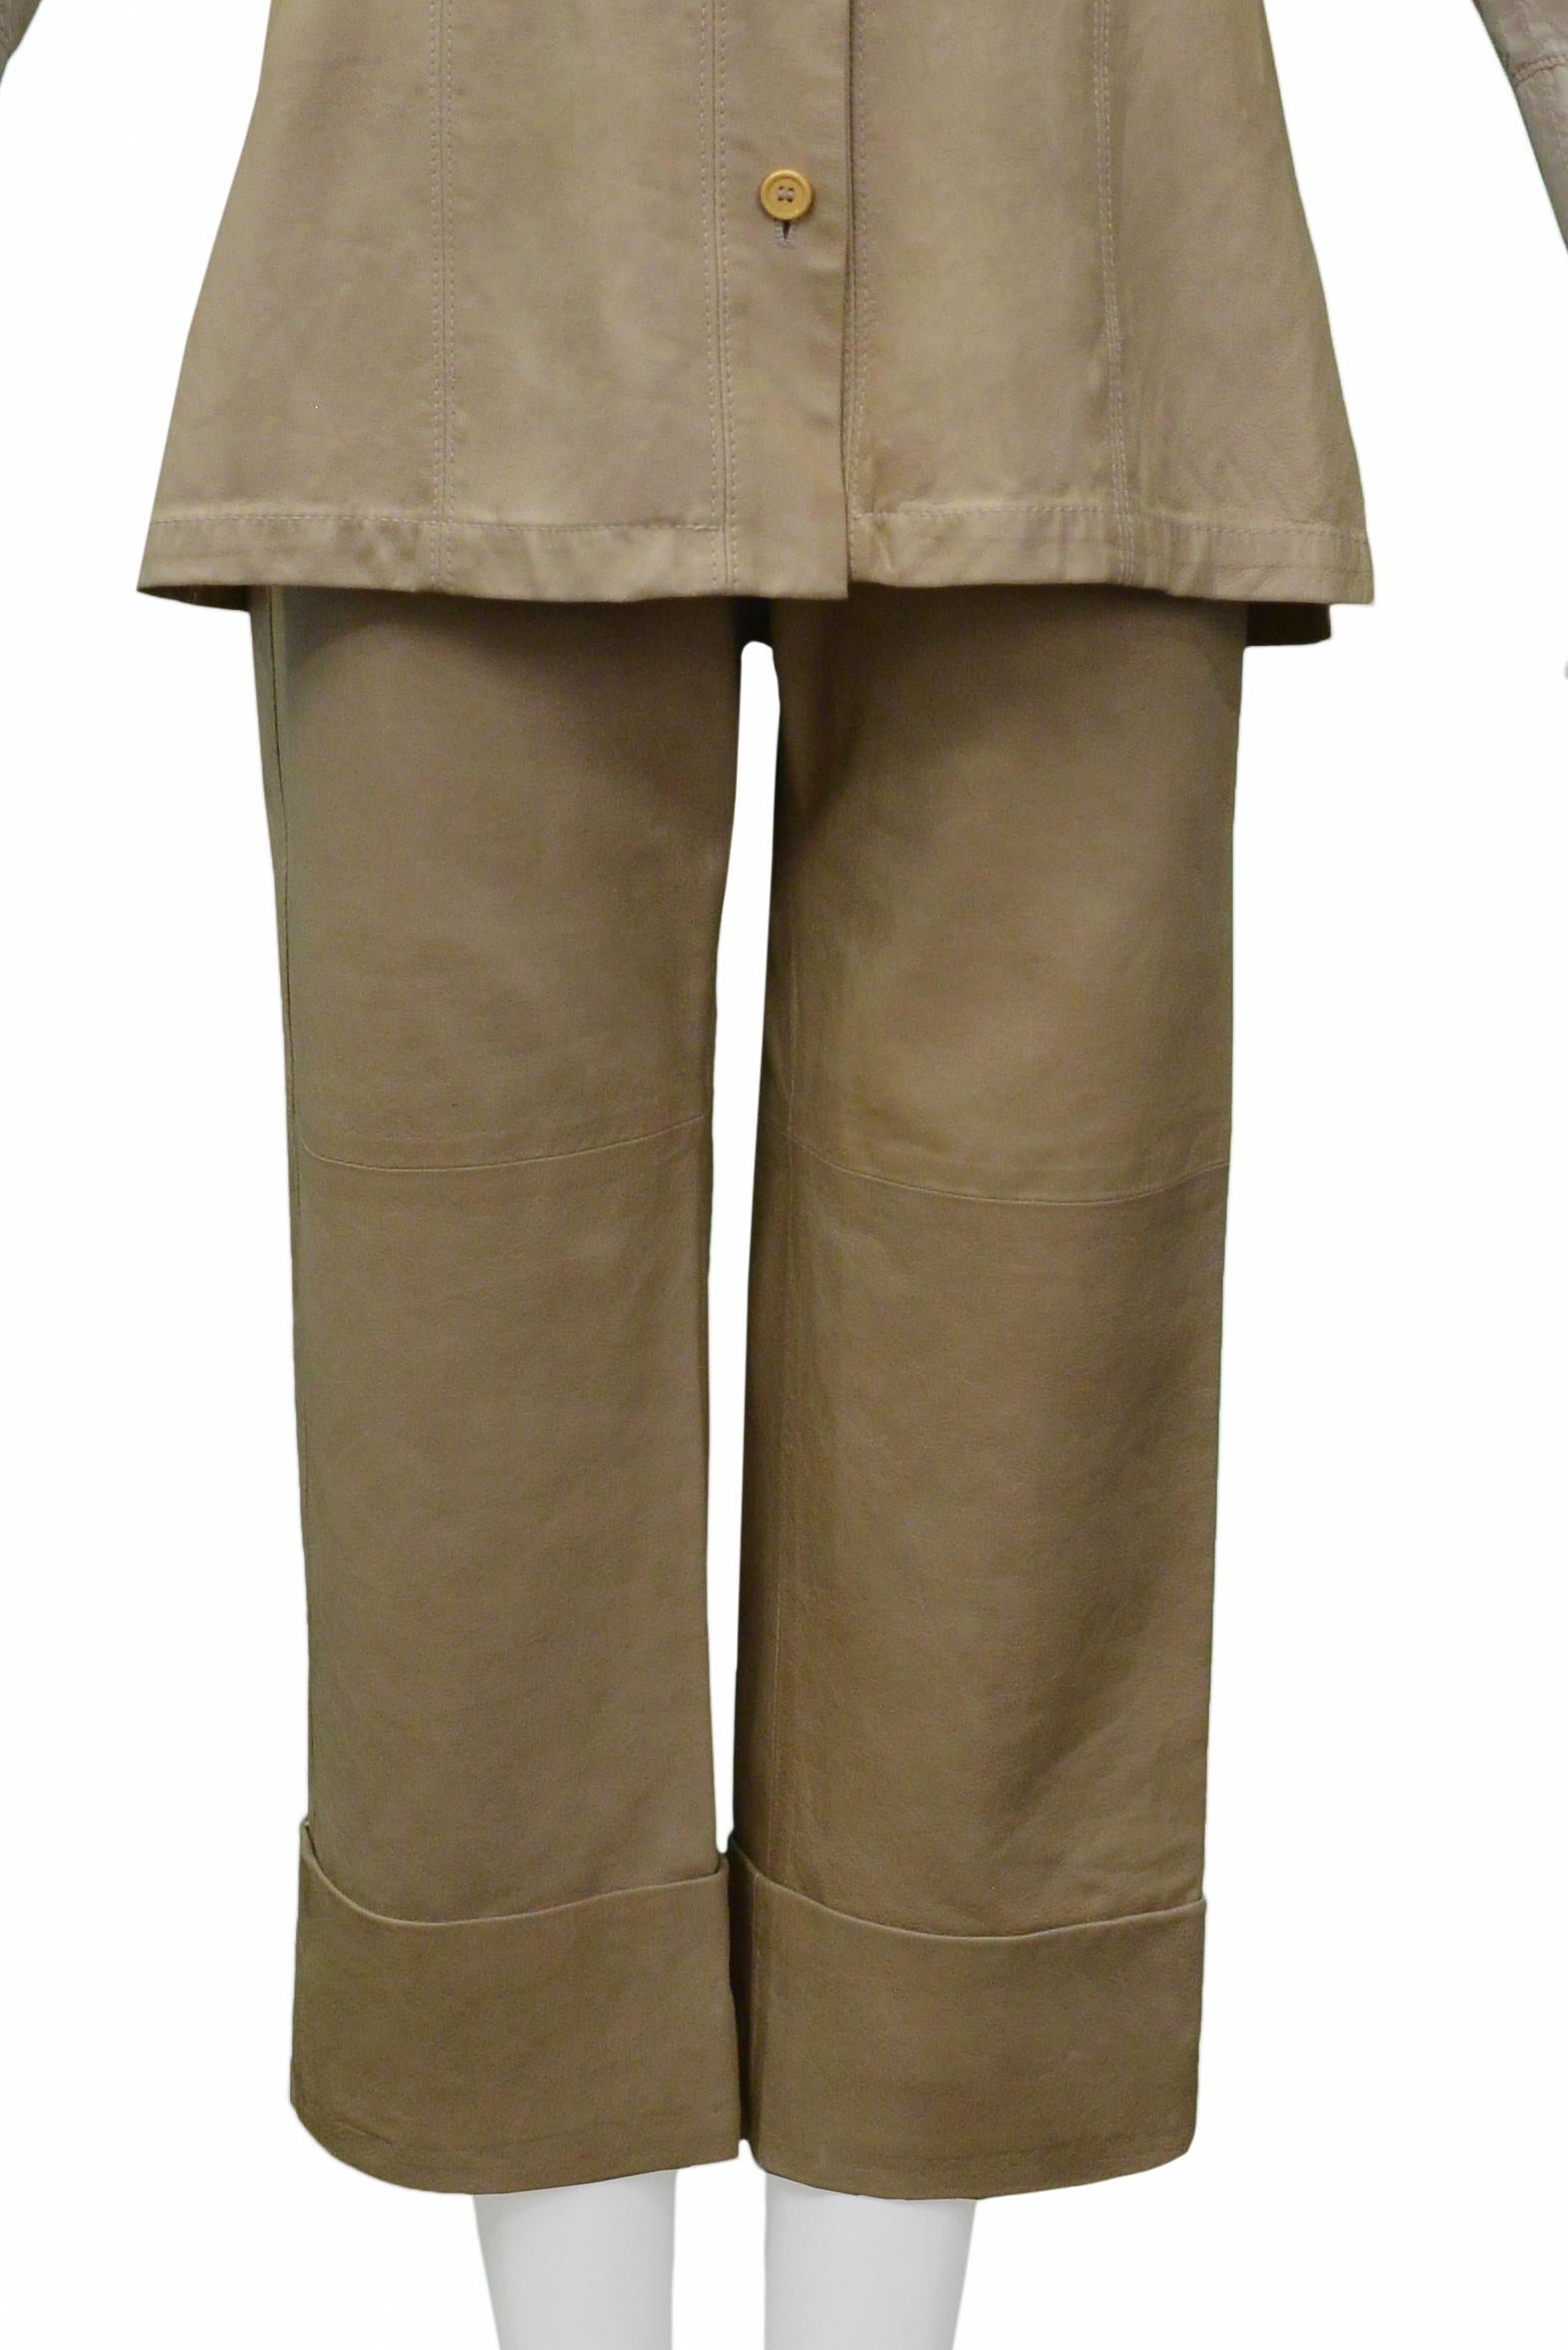 Gianfranco Ferre Beige Leather Jacket & Pants Ensemble In Excellent Condition In Los Angeles, CA